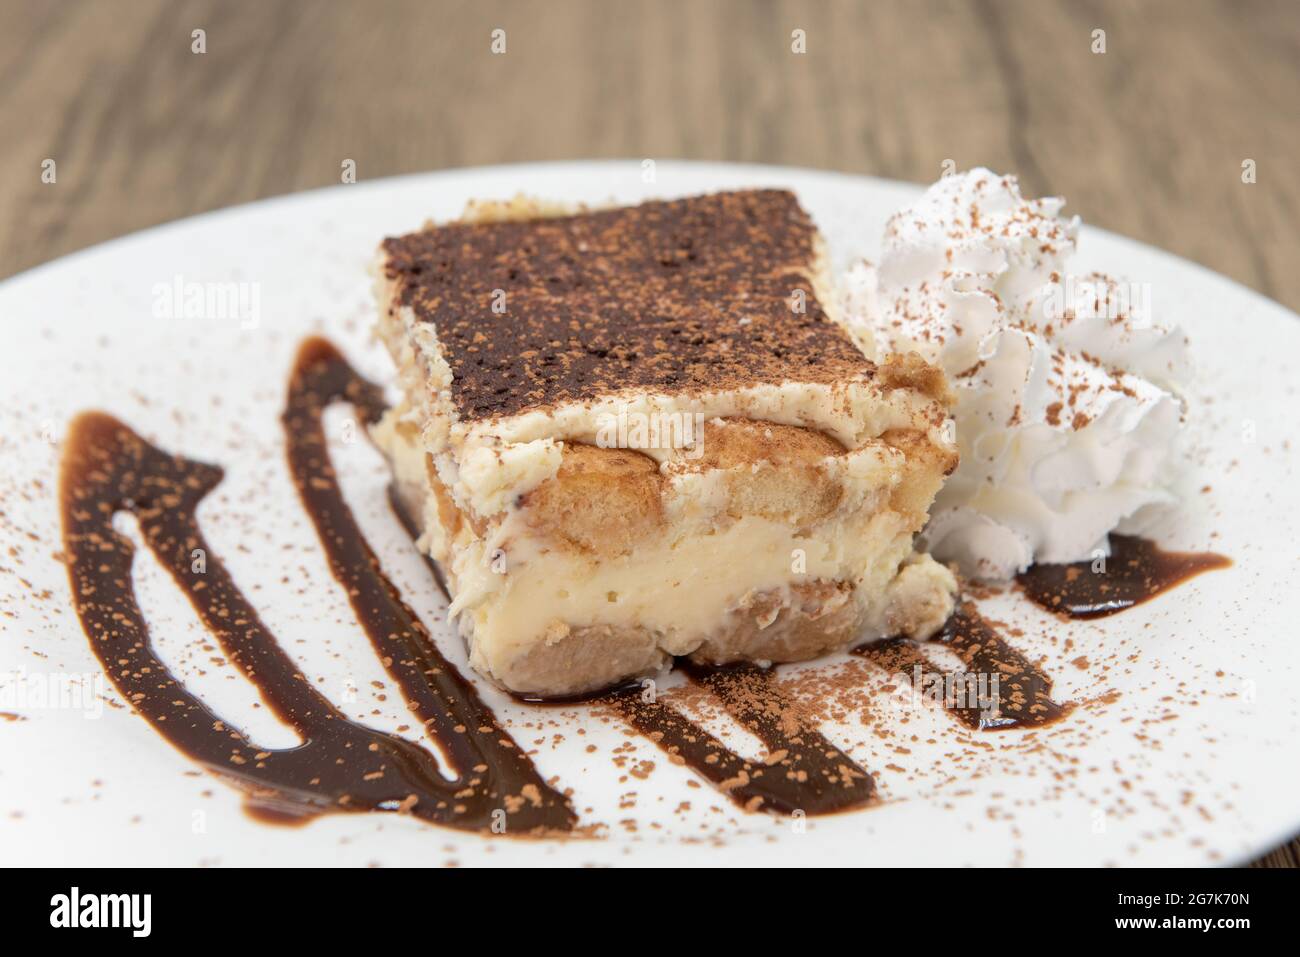 Sweet dessert on a decorated plate of tiramisu cake to enjoy after a meal. Stock Photo